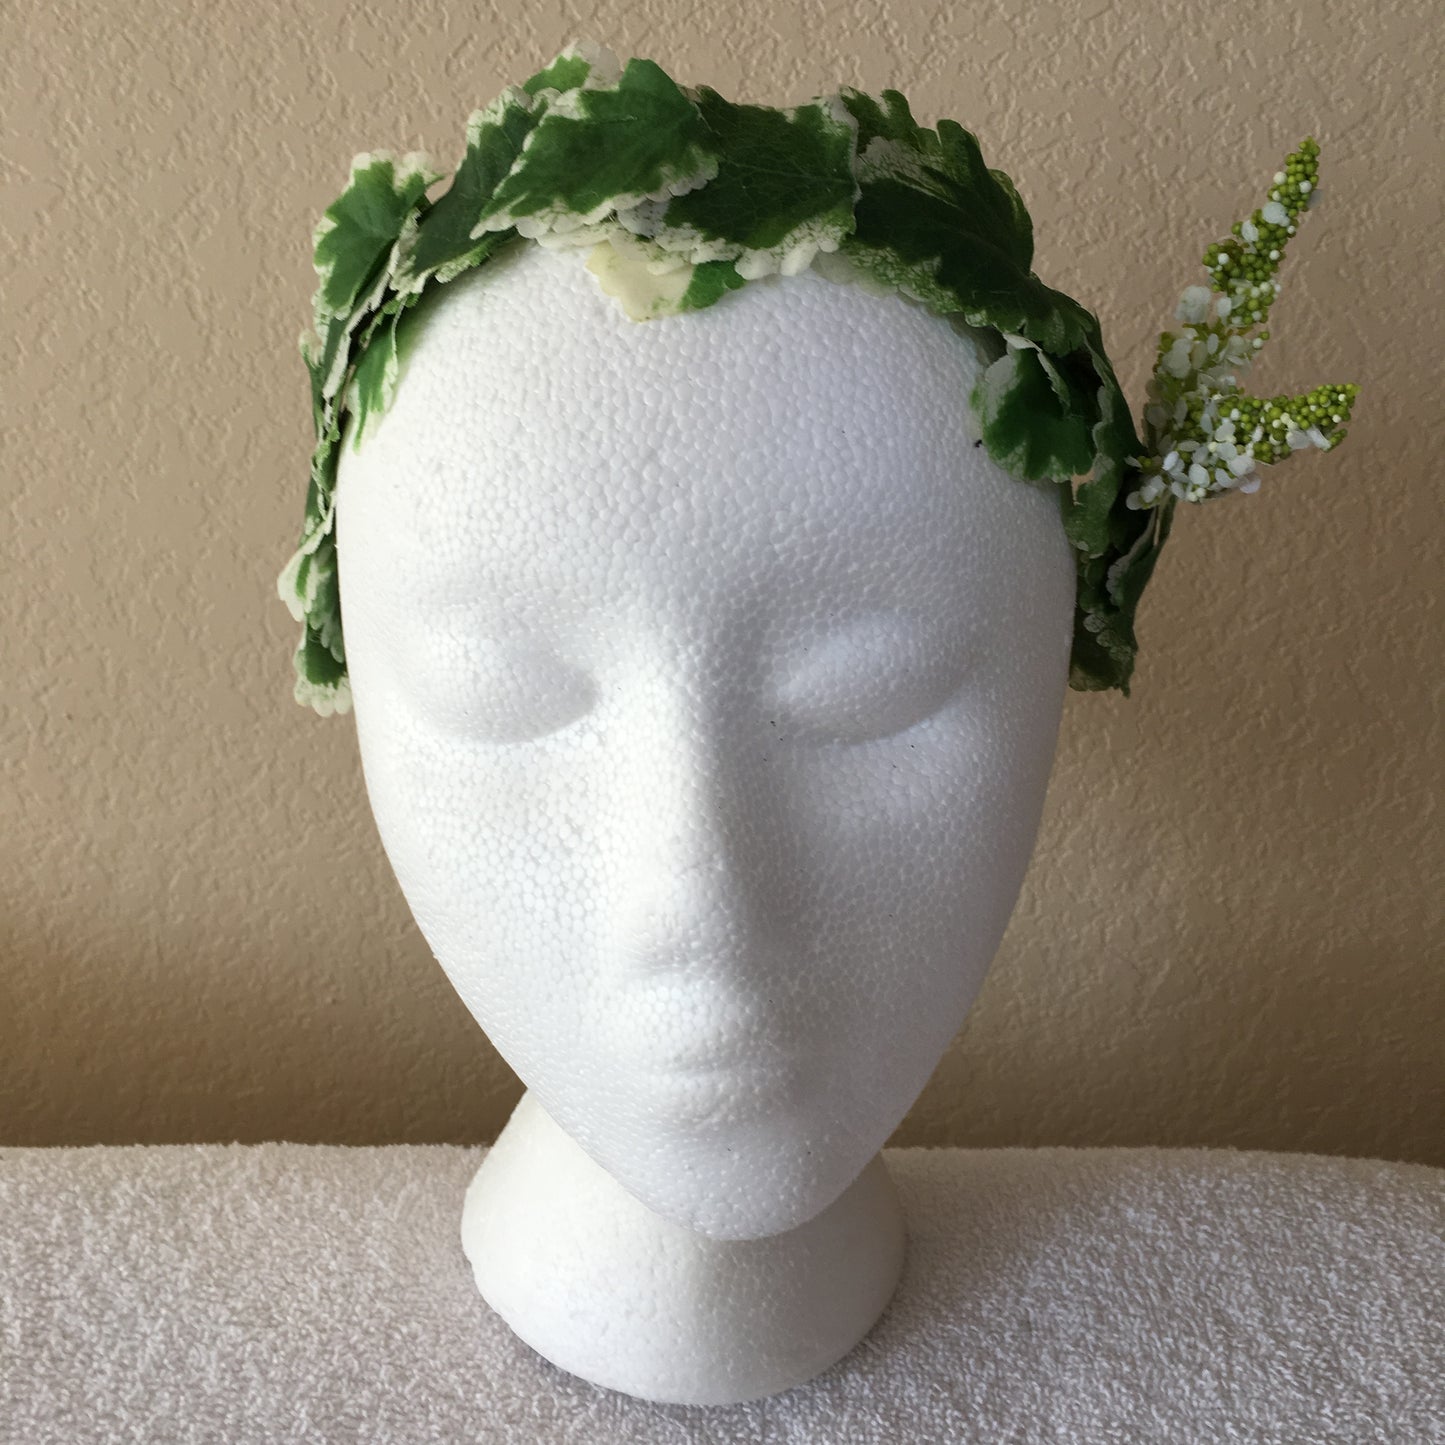 All-Leaf Wreath - Green & white leaves w/ tall white accents